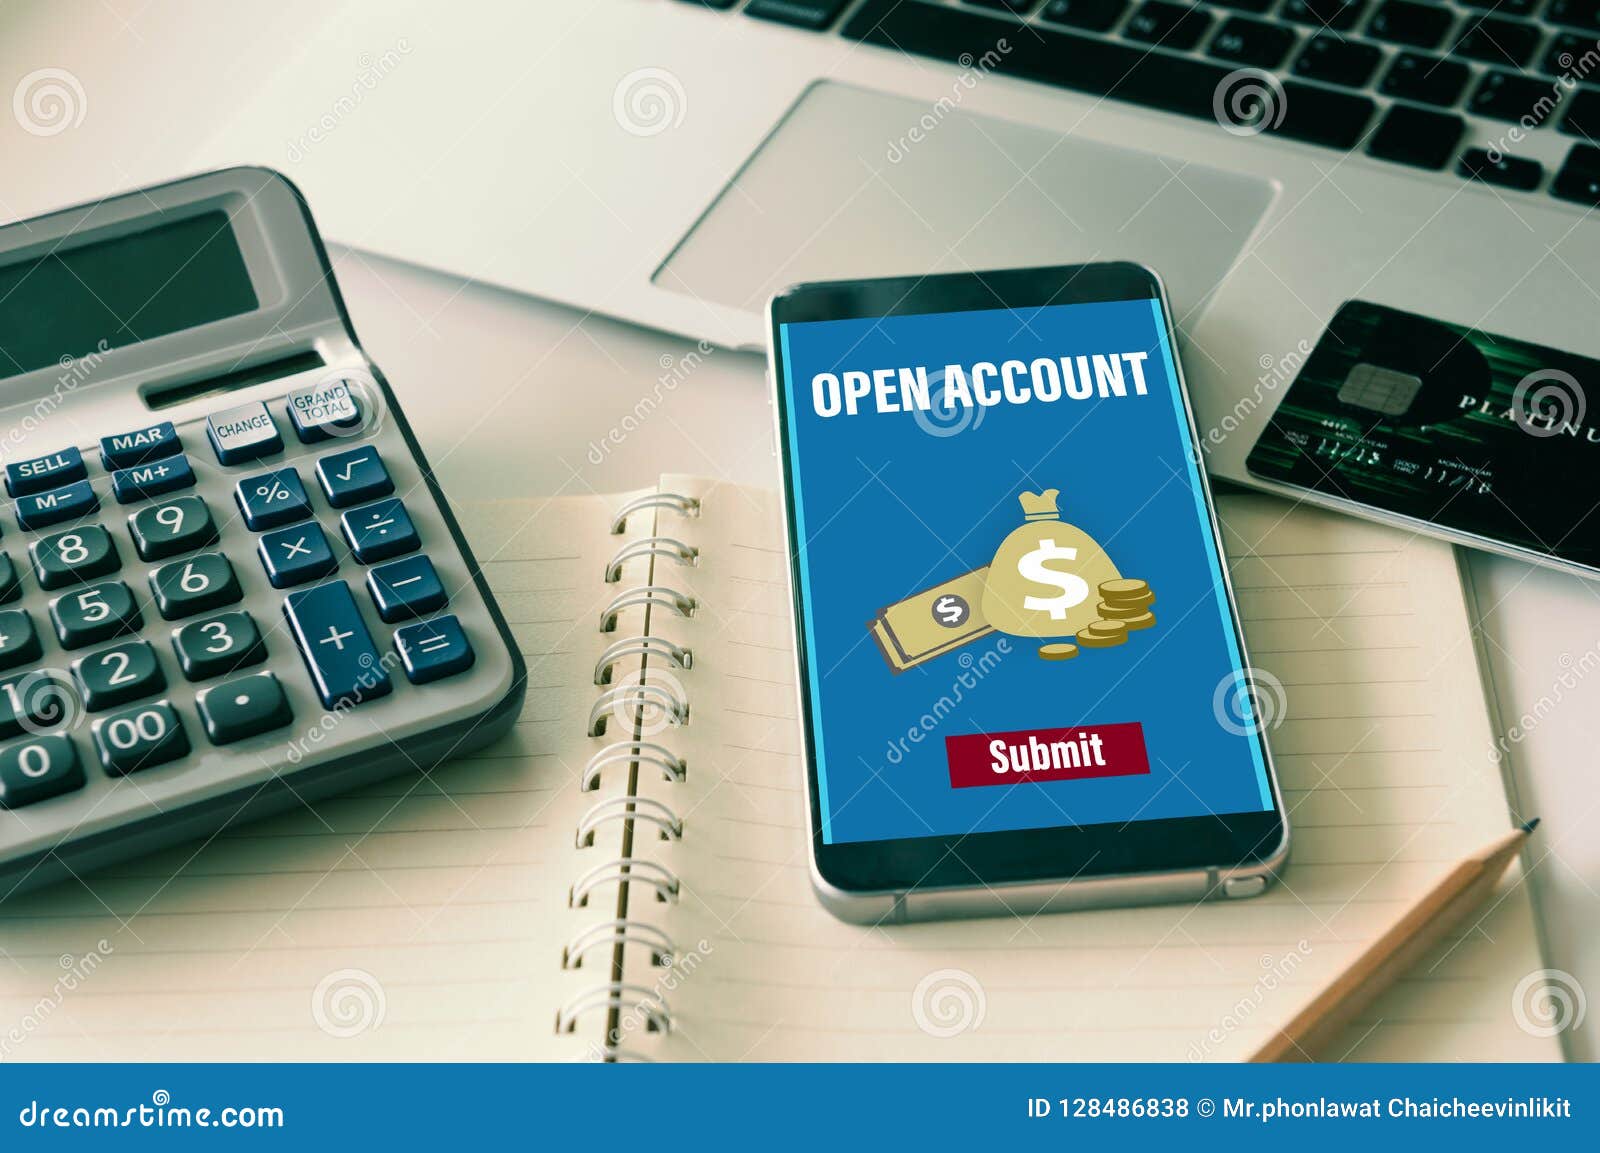 Open a bank account online stock photo. Image of account - 16